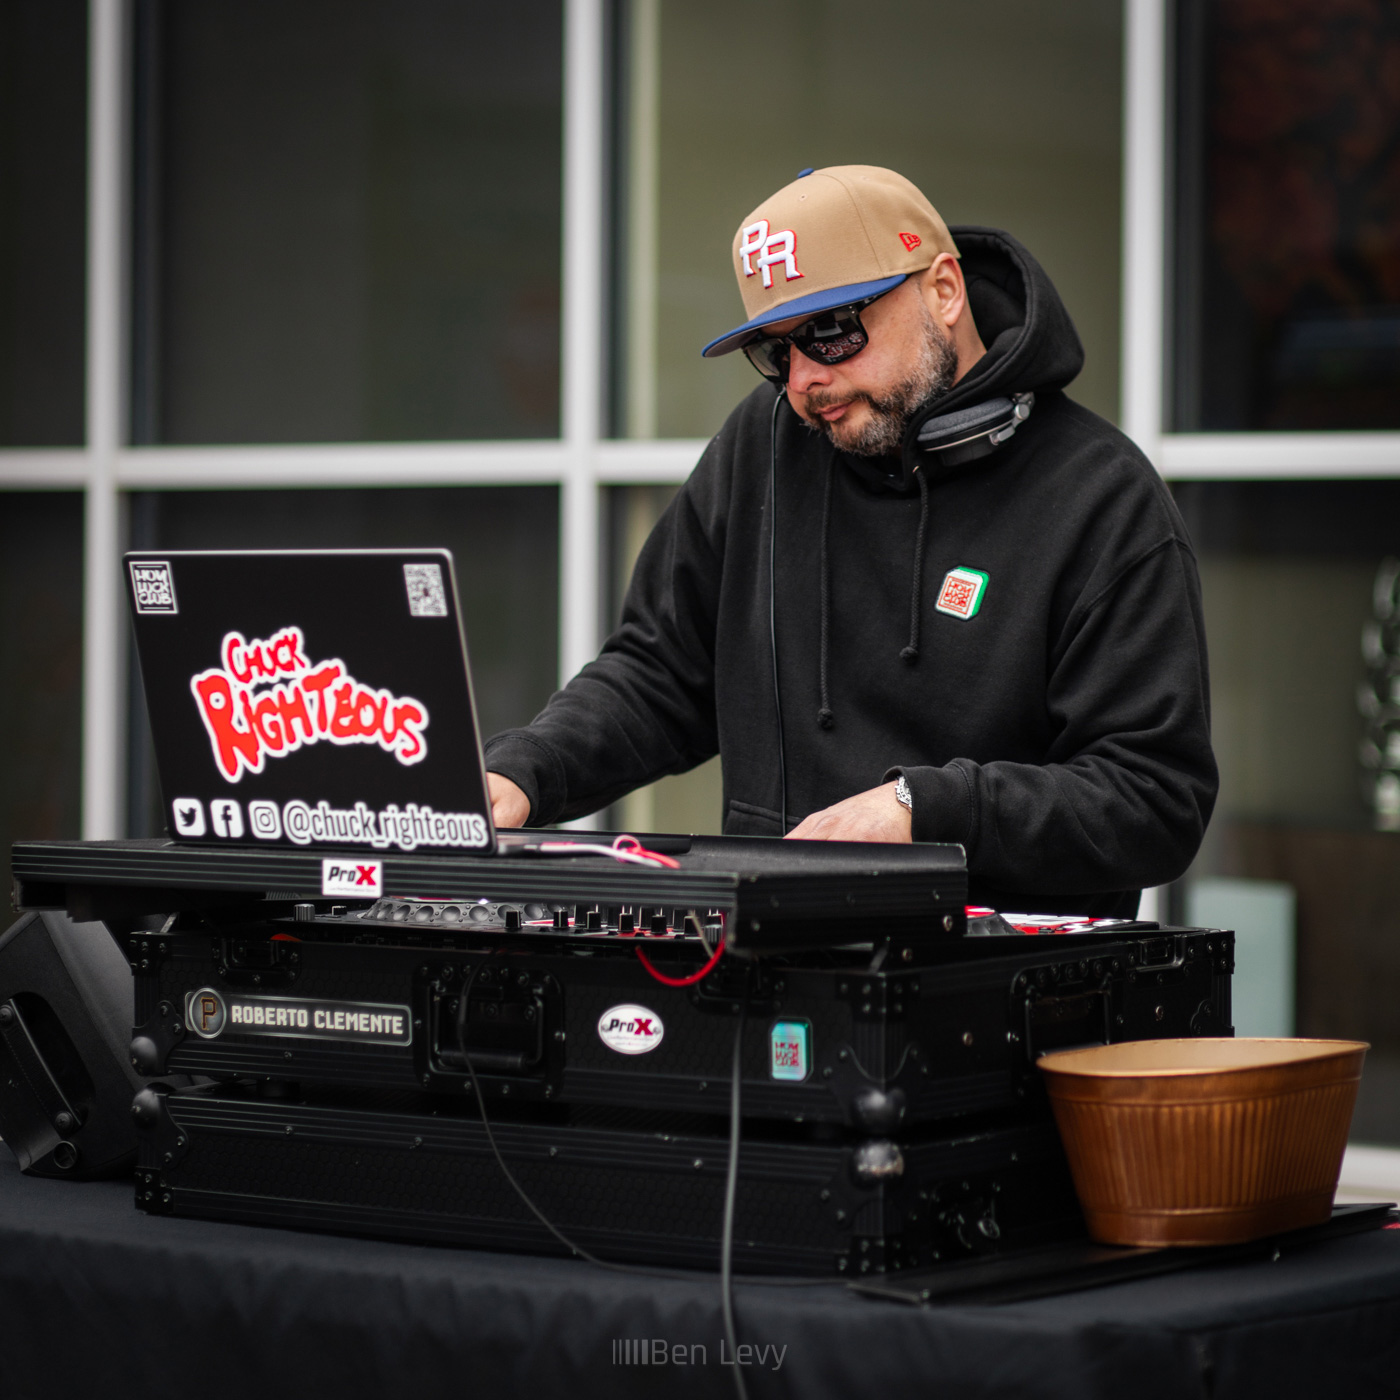 Chuck Righteous DJing at McGrath Acura in Chicago